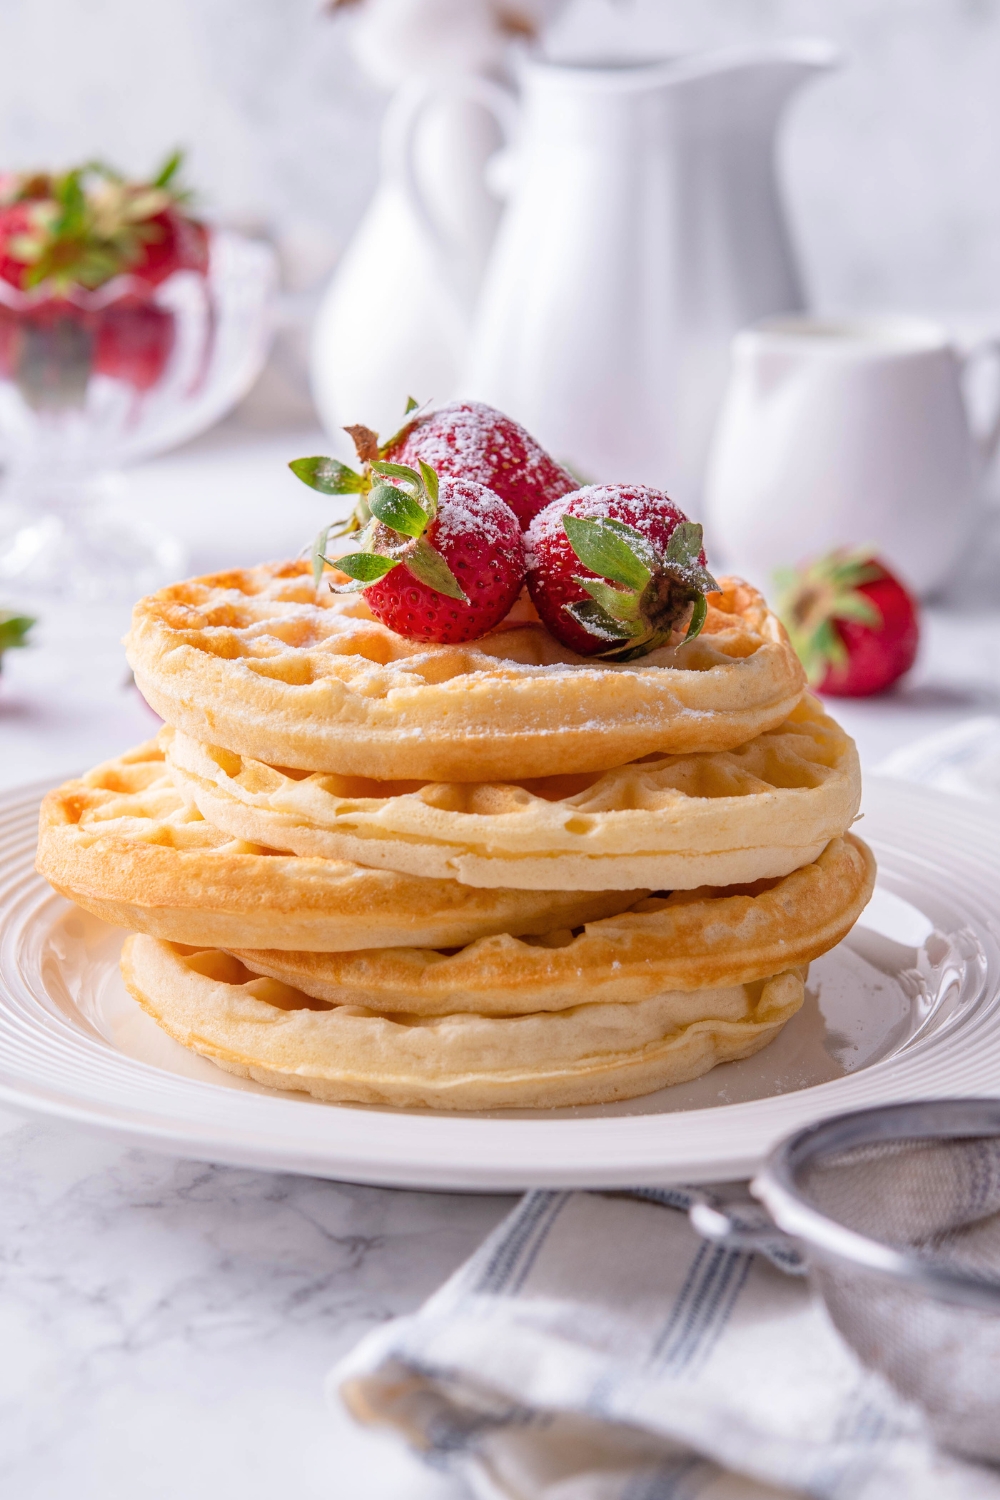 A stack of five mini waffles on a plate with strawberries on top.